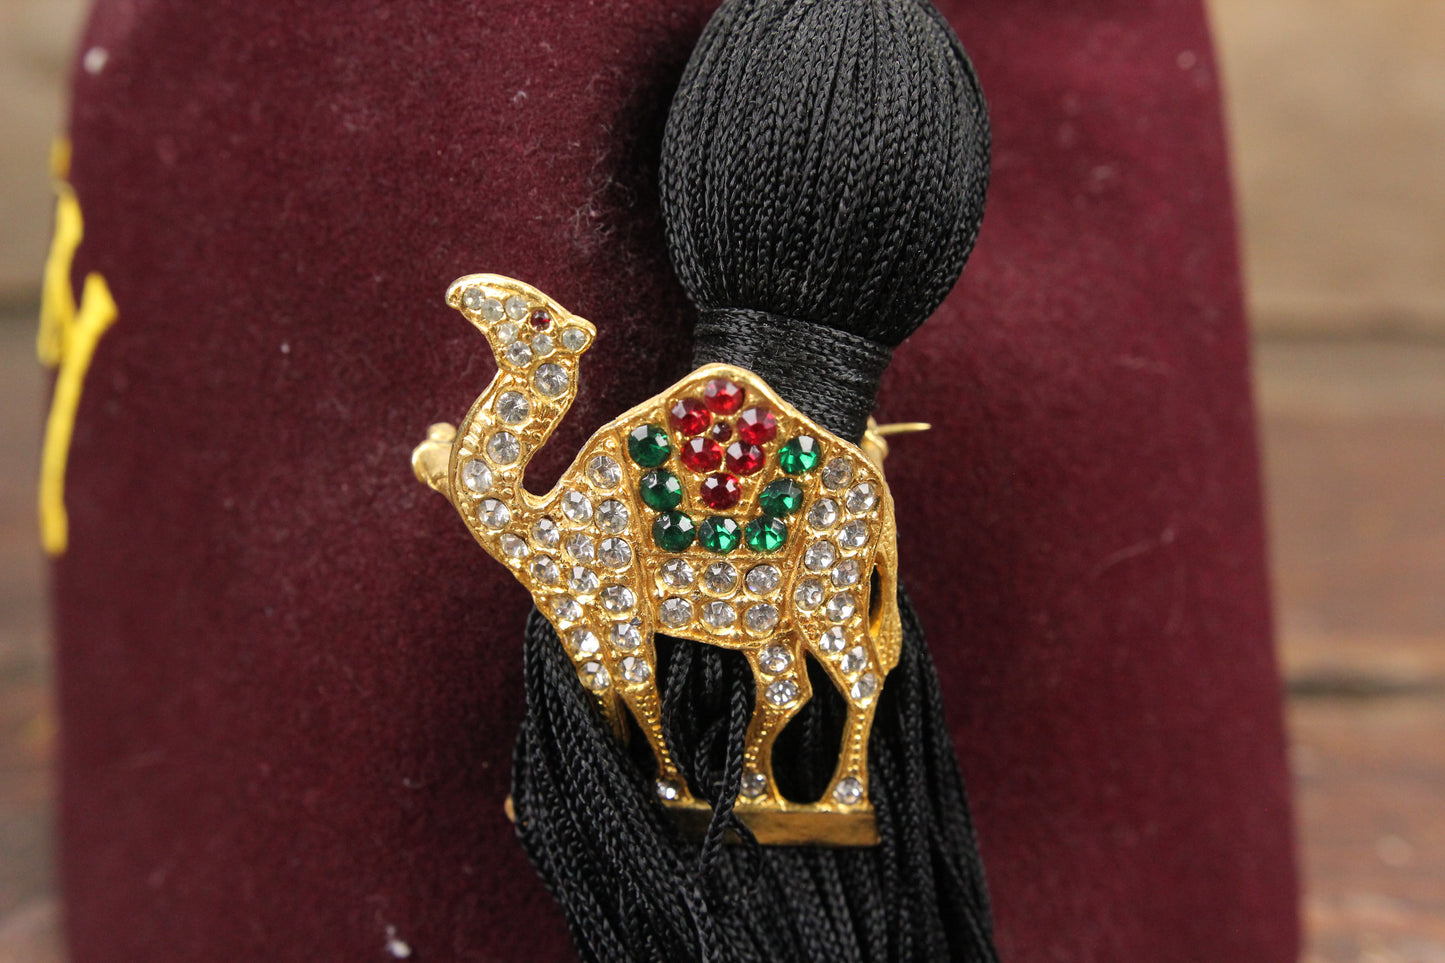 Bektash Shriners Concord, NH Vintage with Tassel and Camel Brooch